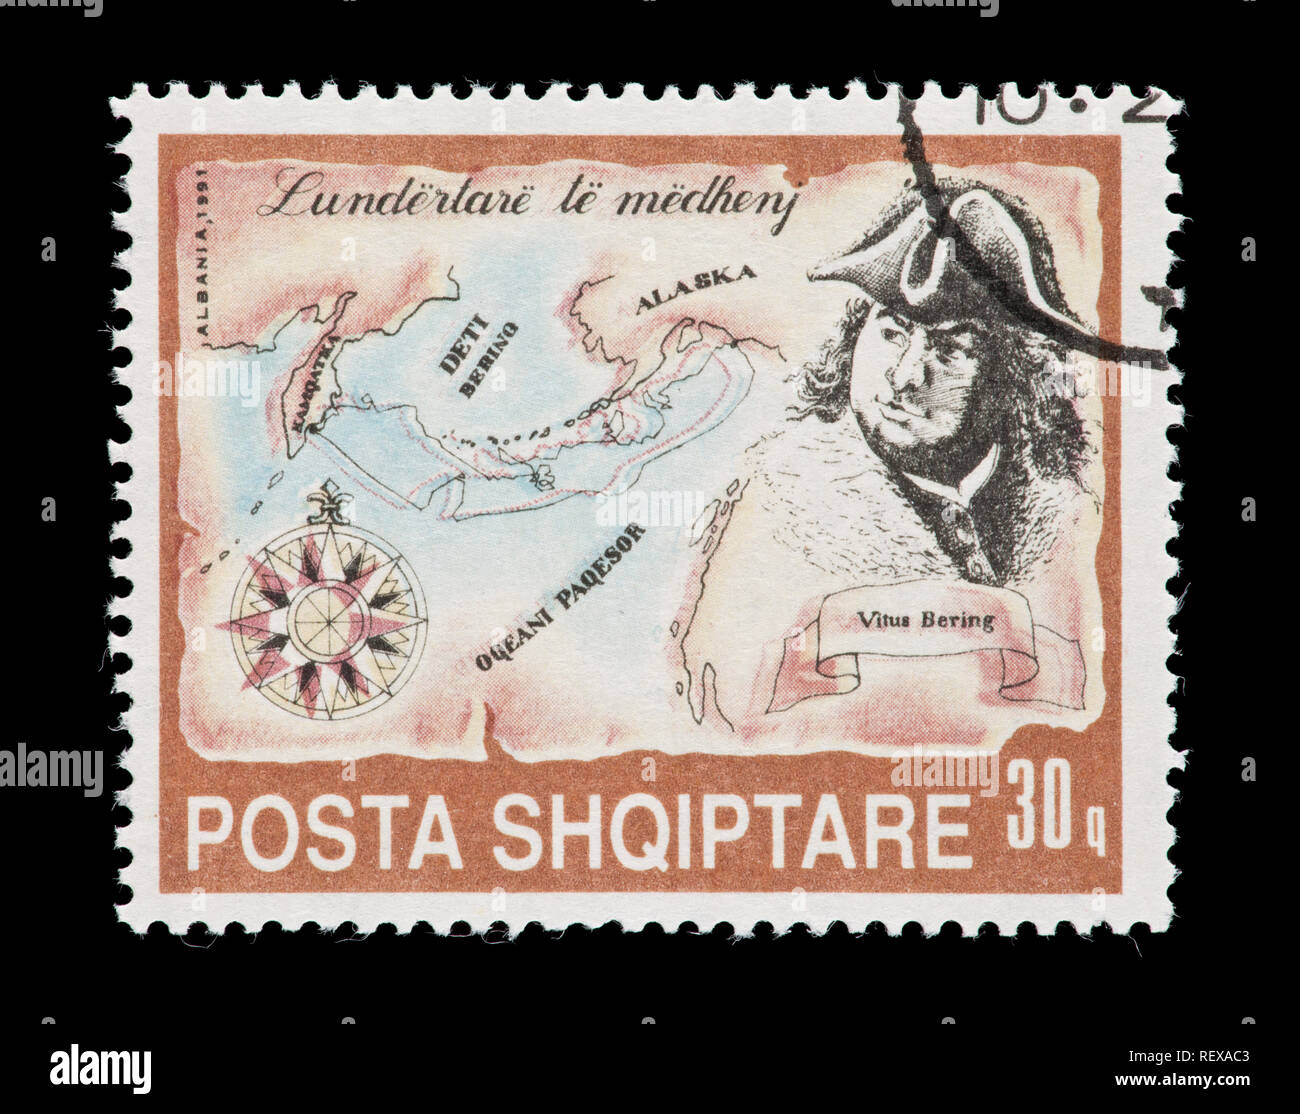 Postage stamp from Albania depicting Vitus Bering and a map of the coasts of Alaska and eastern Russia Stock Photo